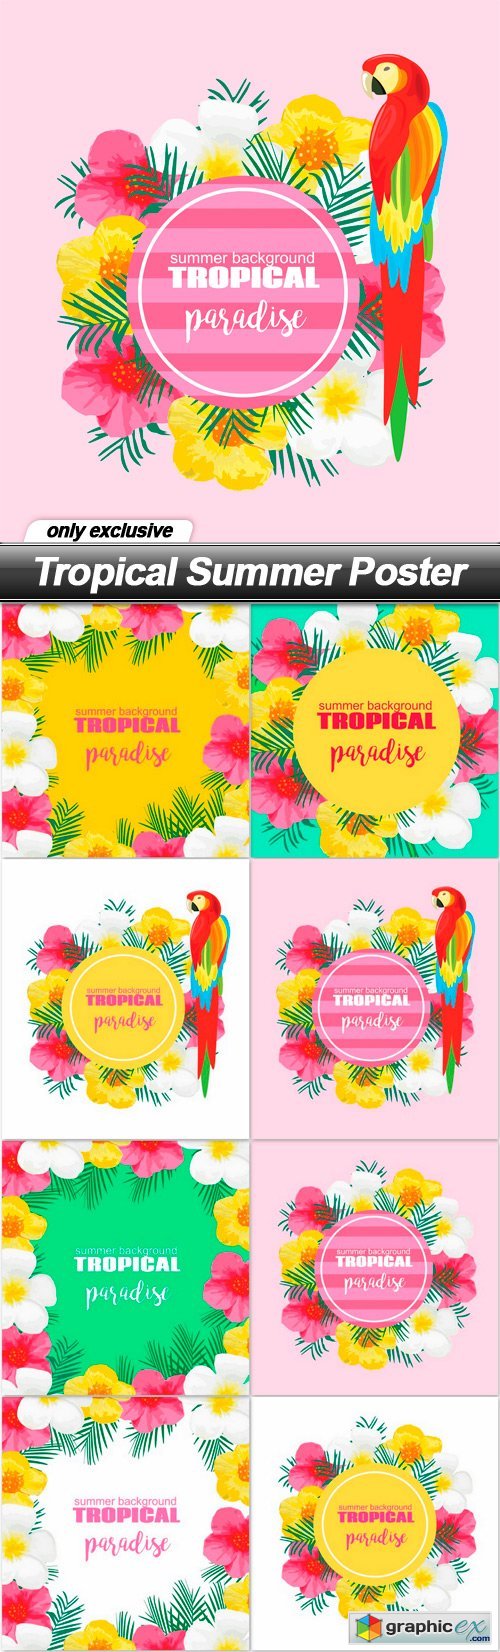 Tropical Summer Poster - 8 EPS